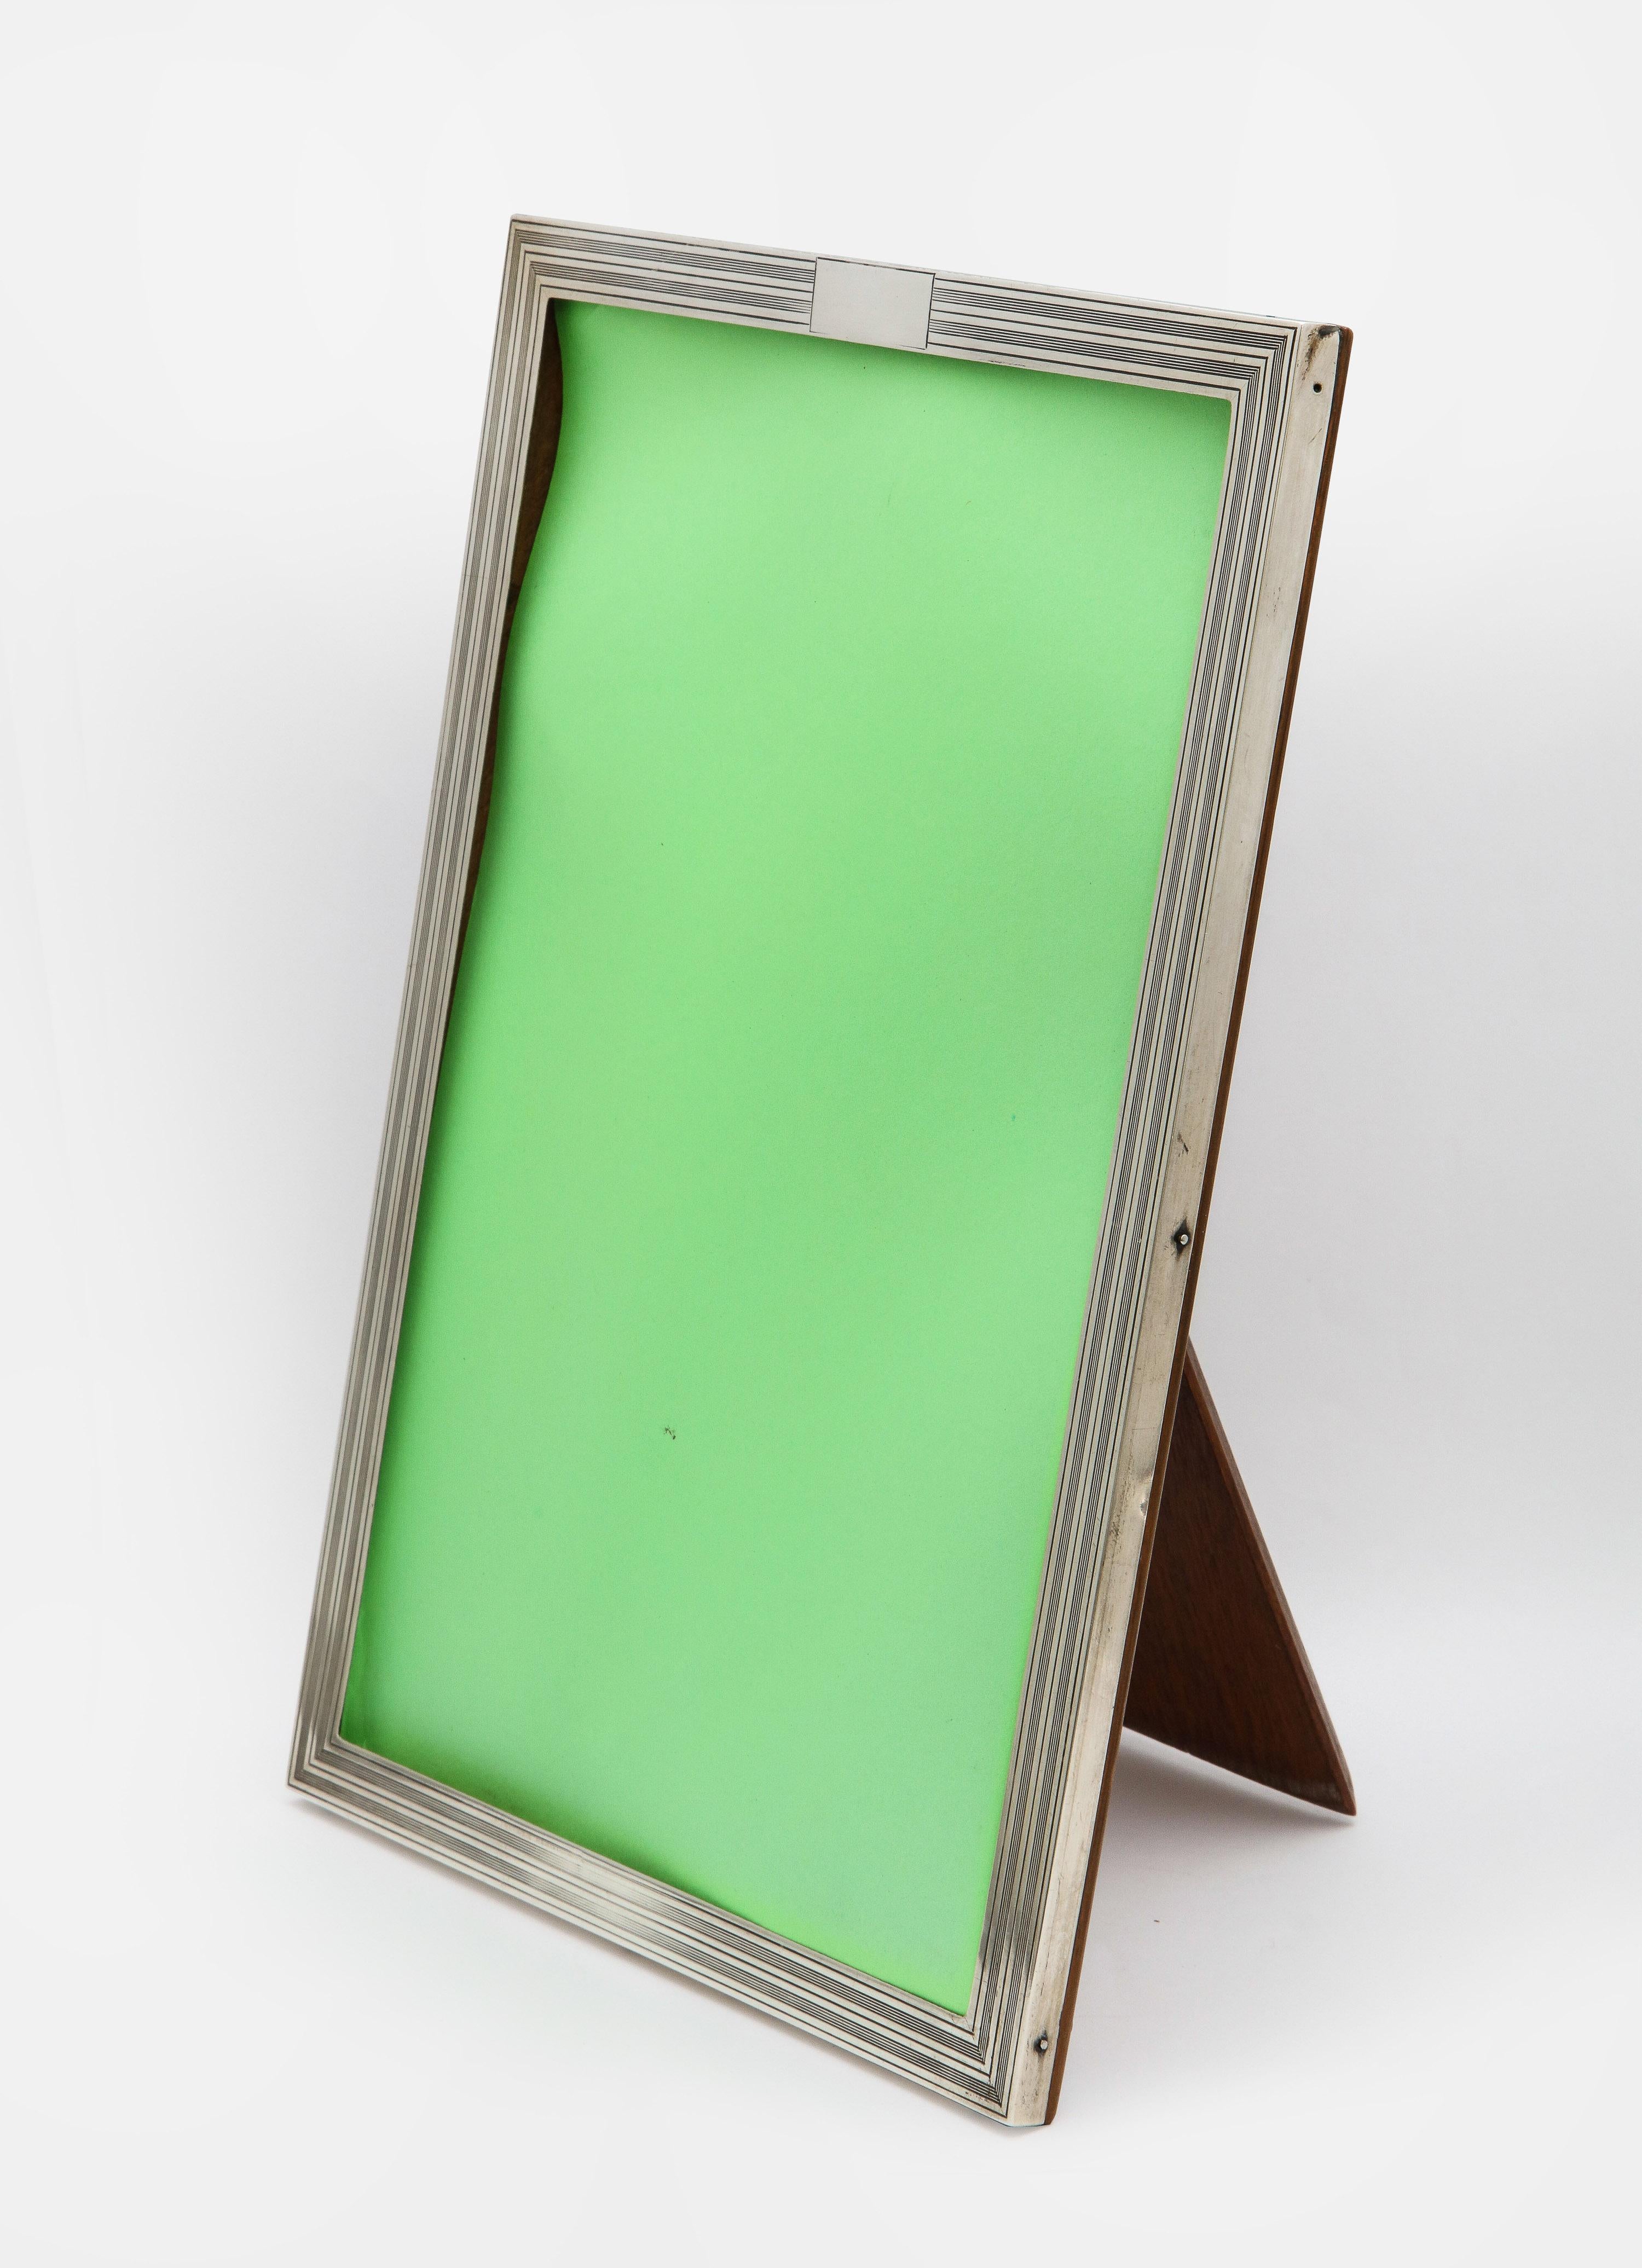 Art Deco, sterling silver, tuxedo-striped picture frame with wood back, Birmingham, England, year-hallmarked for 1925, Charles S. Green and Co., Ltd. - makers. Vacant cartouche. Measures 10 3/4 inches high x 7 1/2 inches wide x 7 1/4 inches deep